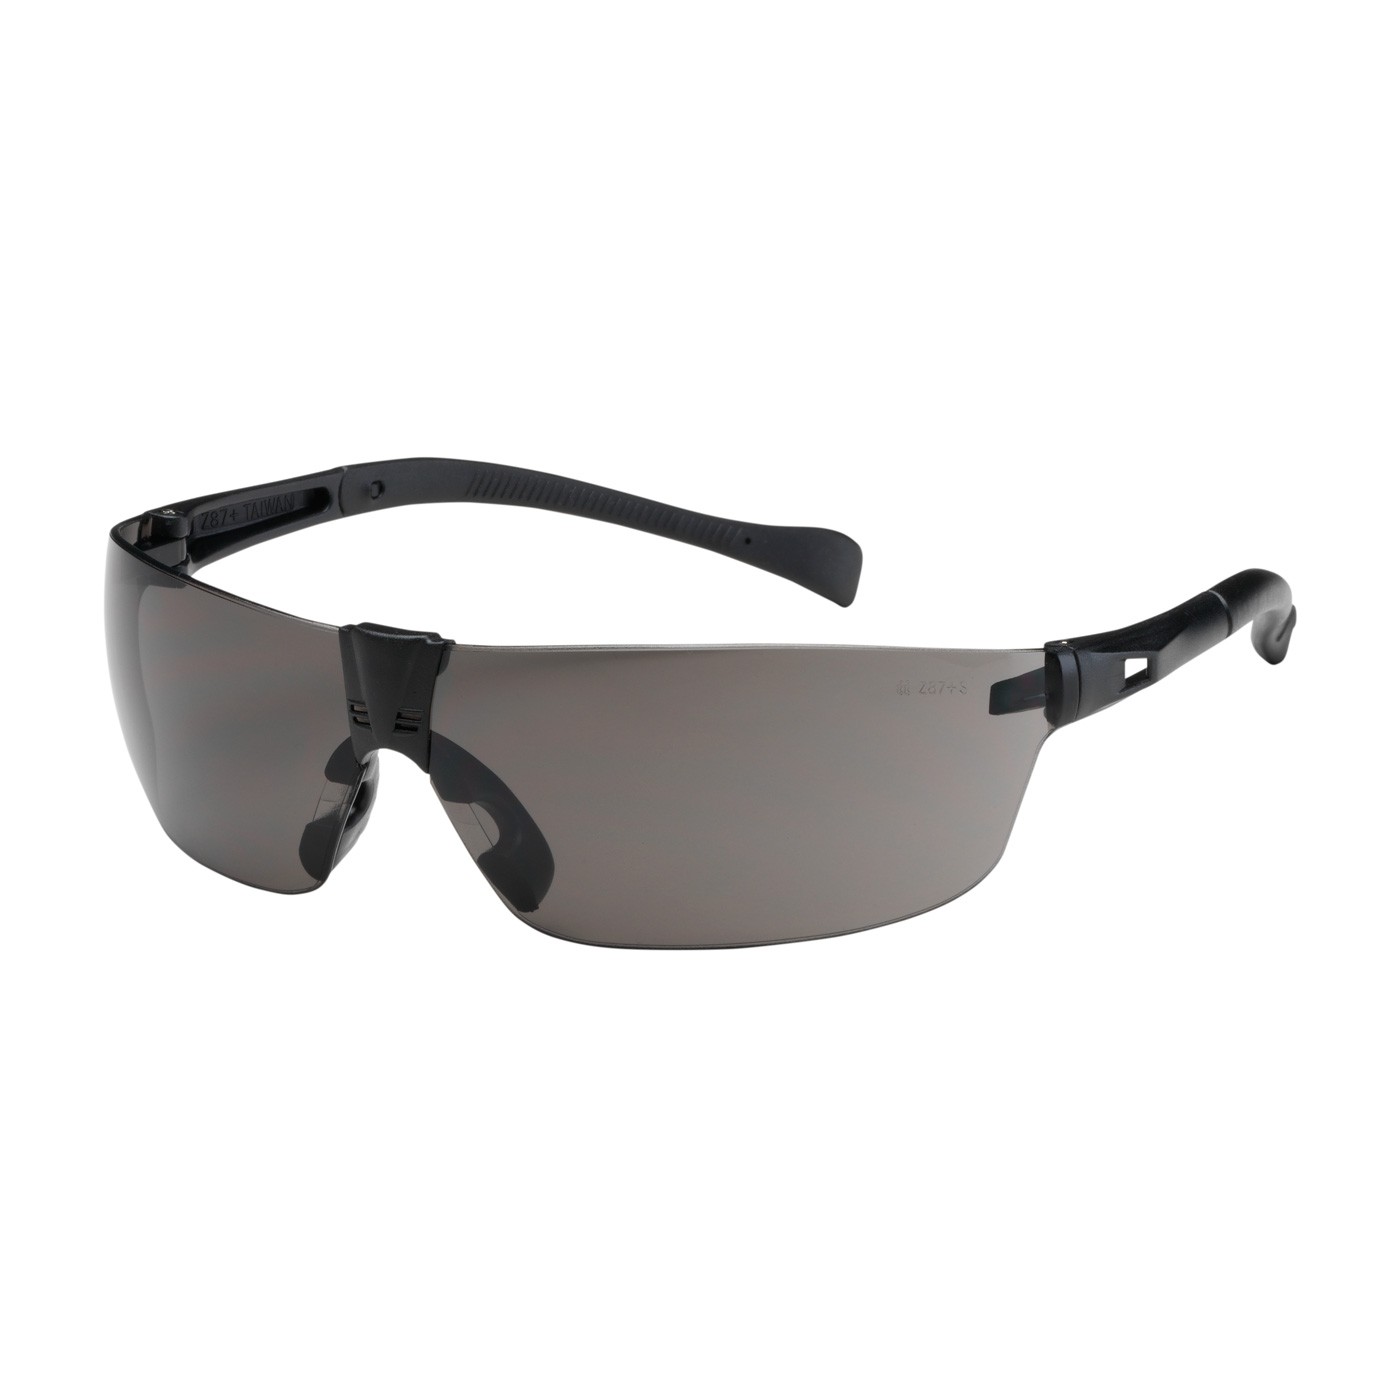 Monteray II™ Rimless Safety Glasses with Black Temple, Gray Lens and Anti-Scratch Coating  (#250-MT-10072)